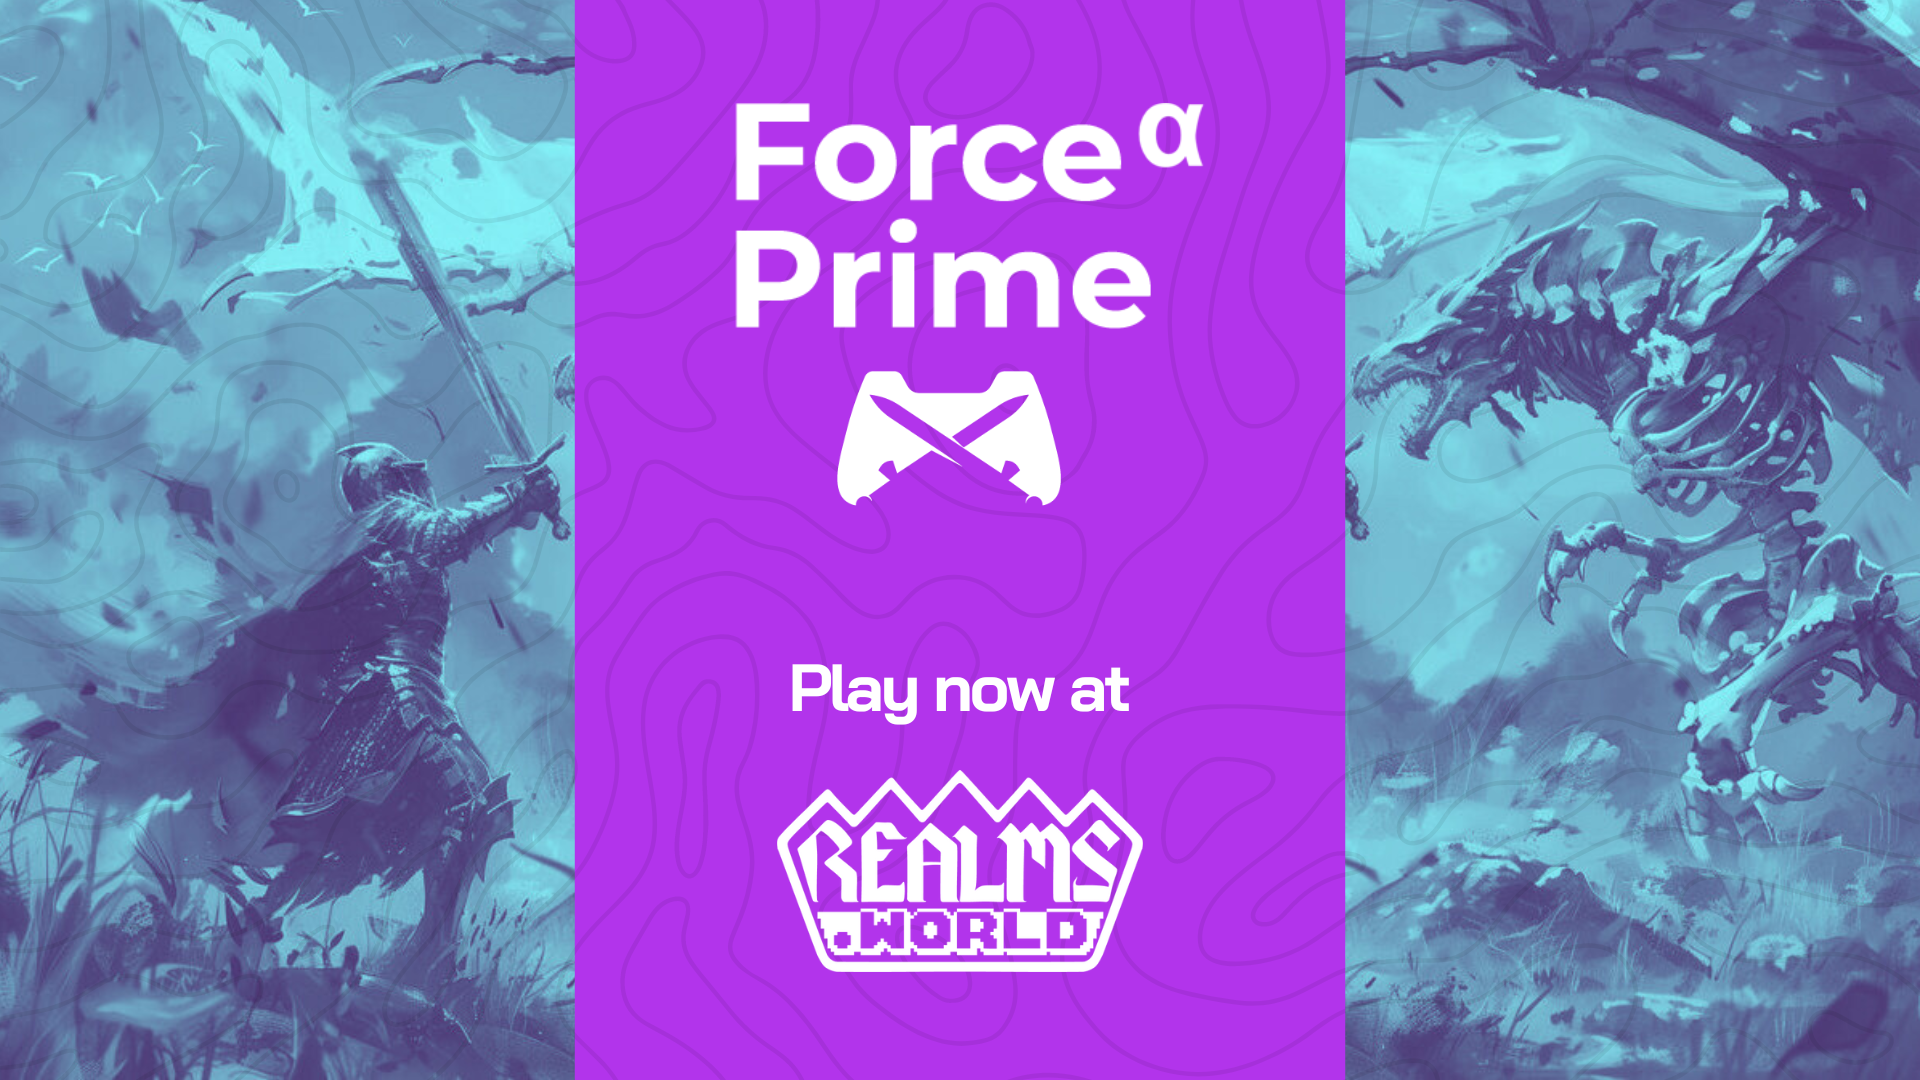 Discover Force Prime Heroes in the Realms.World